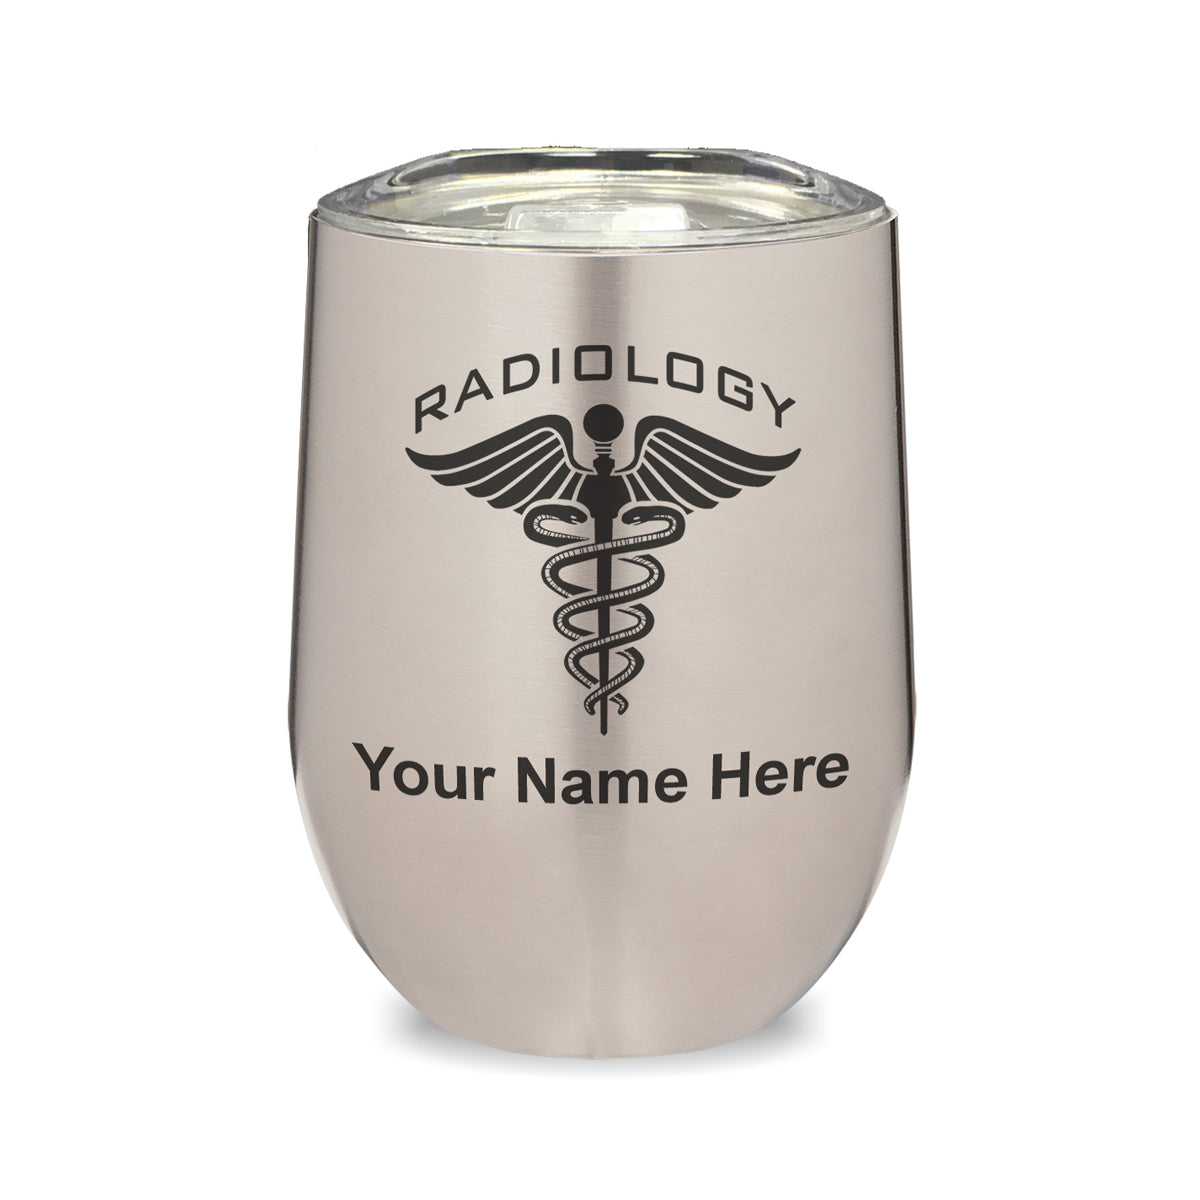 LaserGram Double Wall Stainless Steel Wine Glass, Radiology, Personalized Engraving Included